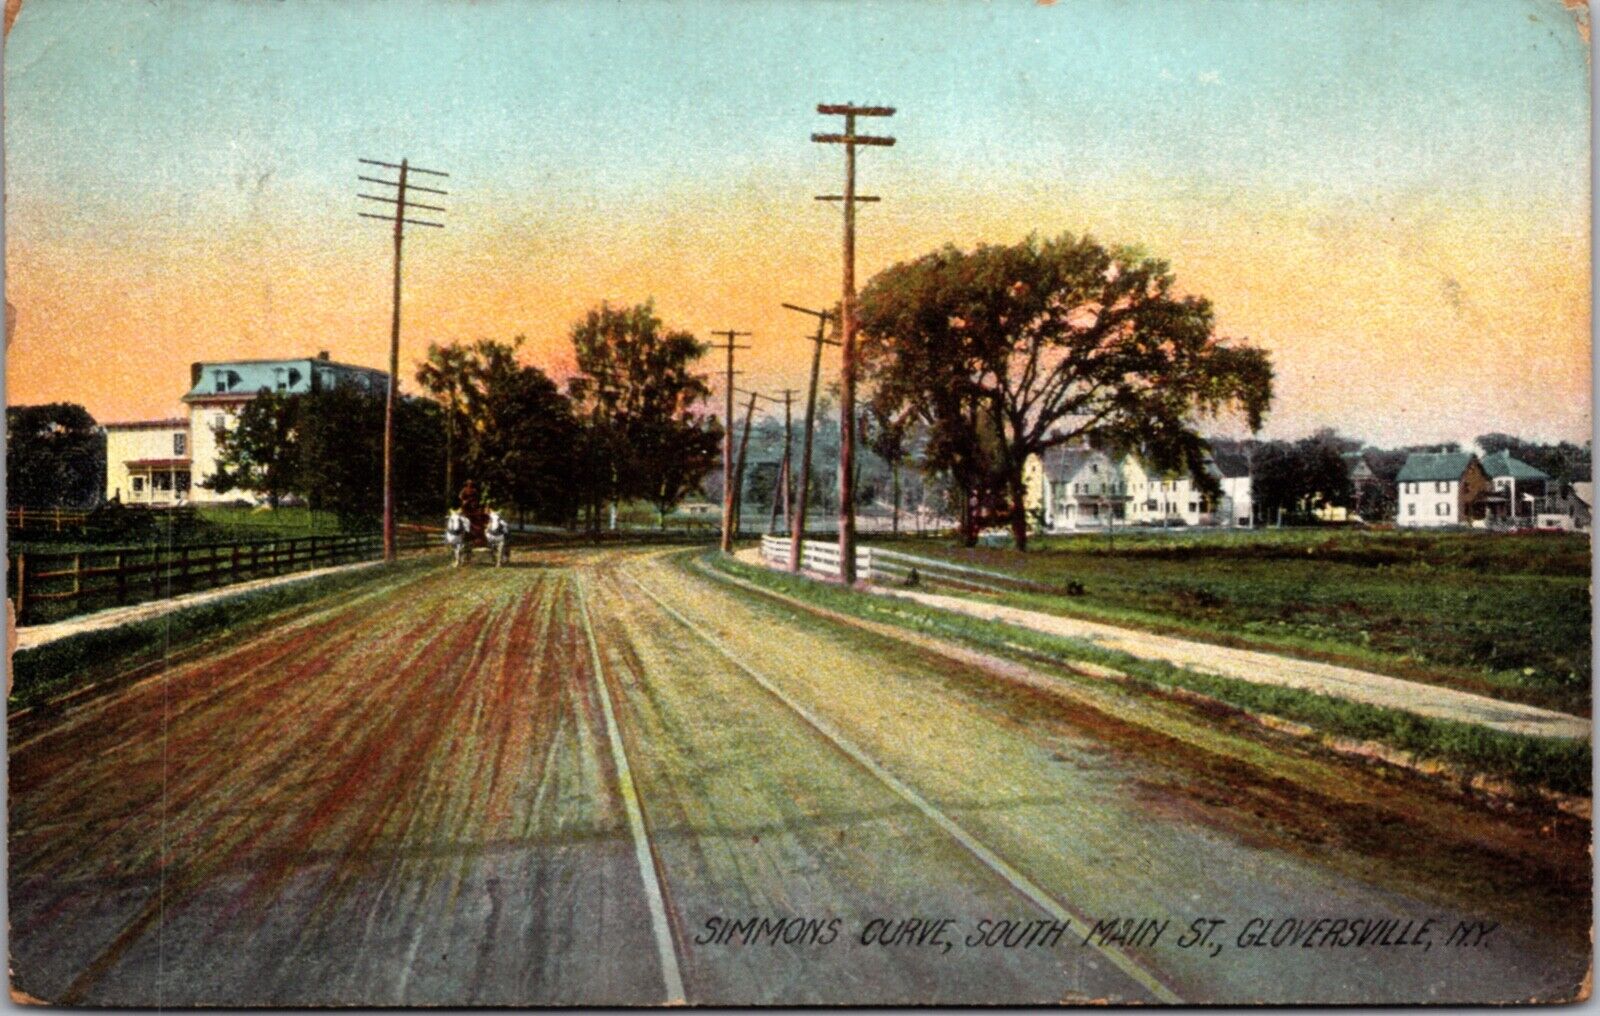 Postcard Simmons Curve, South Main Street in Gloversville, New York